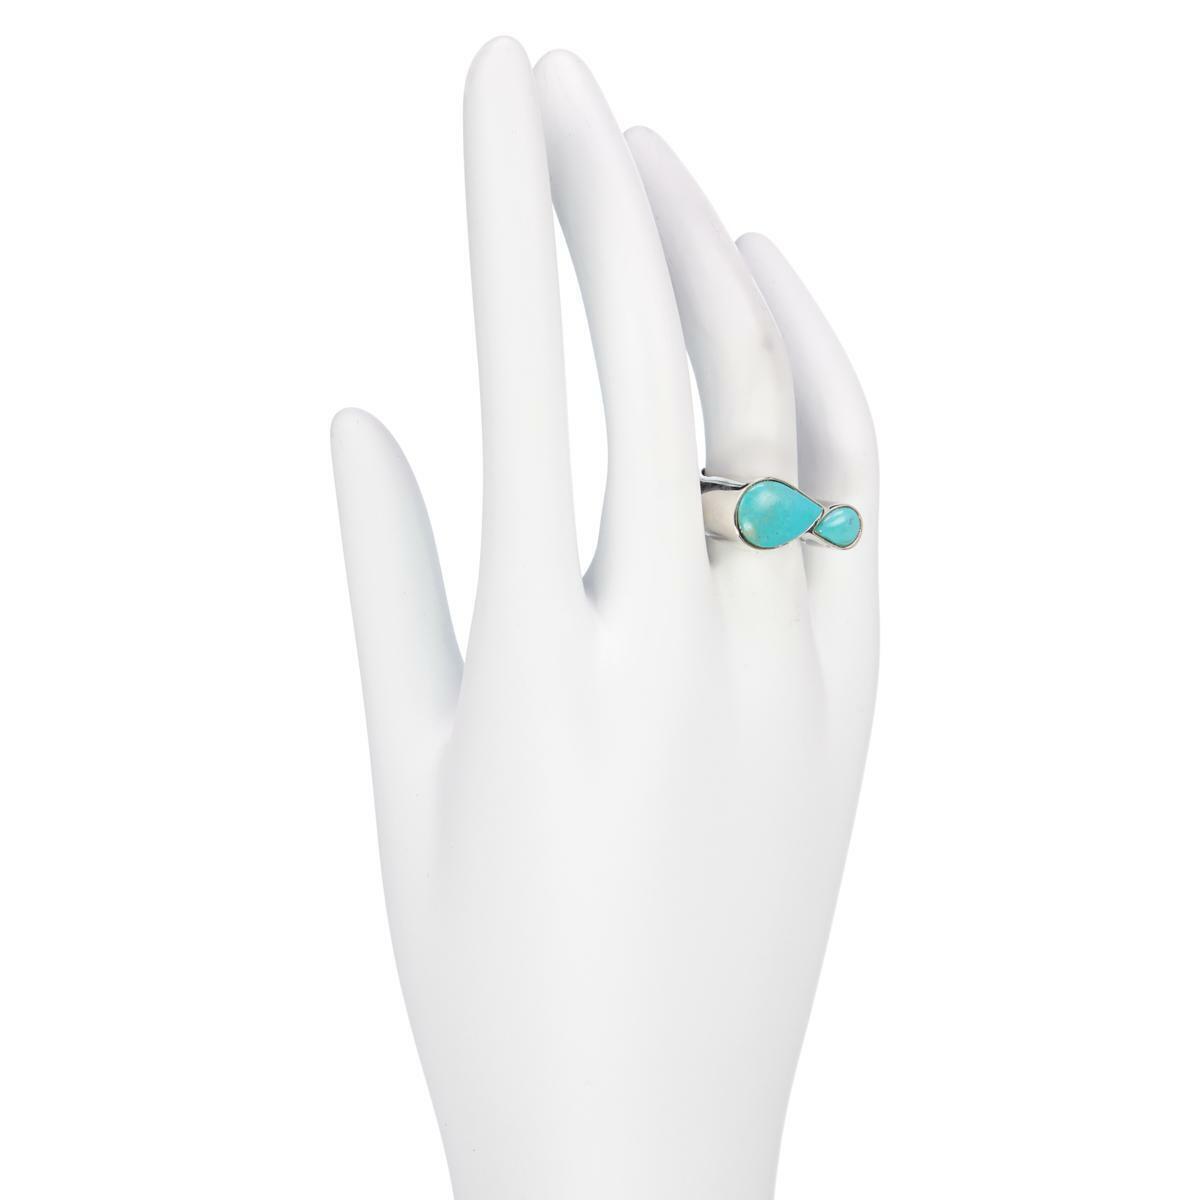 Jay King 2Stone Turquoise Hill Turquoise Sterling Silver Ring Size 7 HSN $90 (36